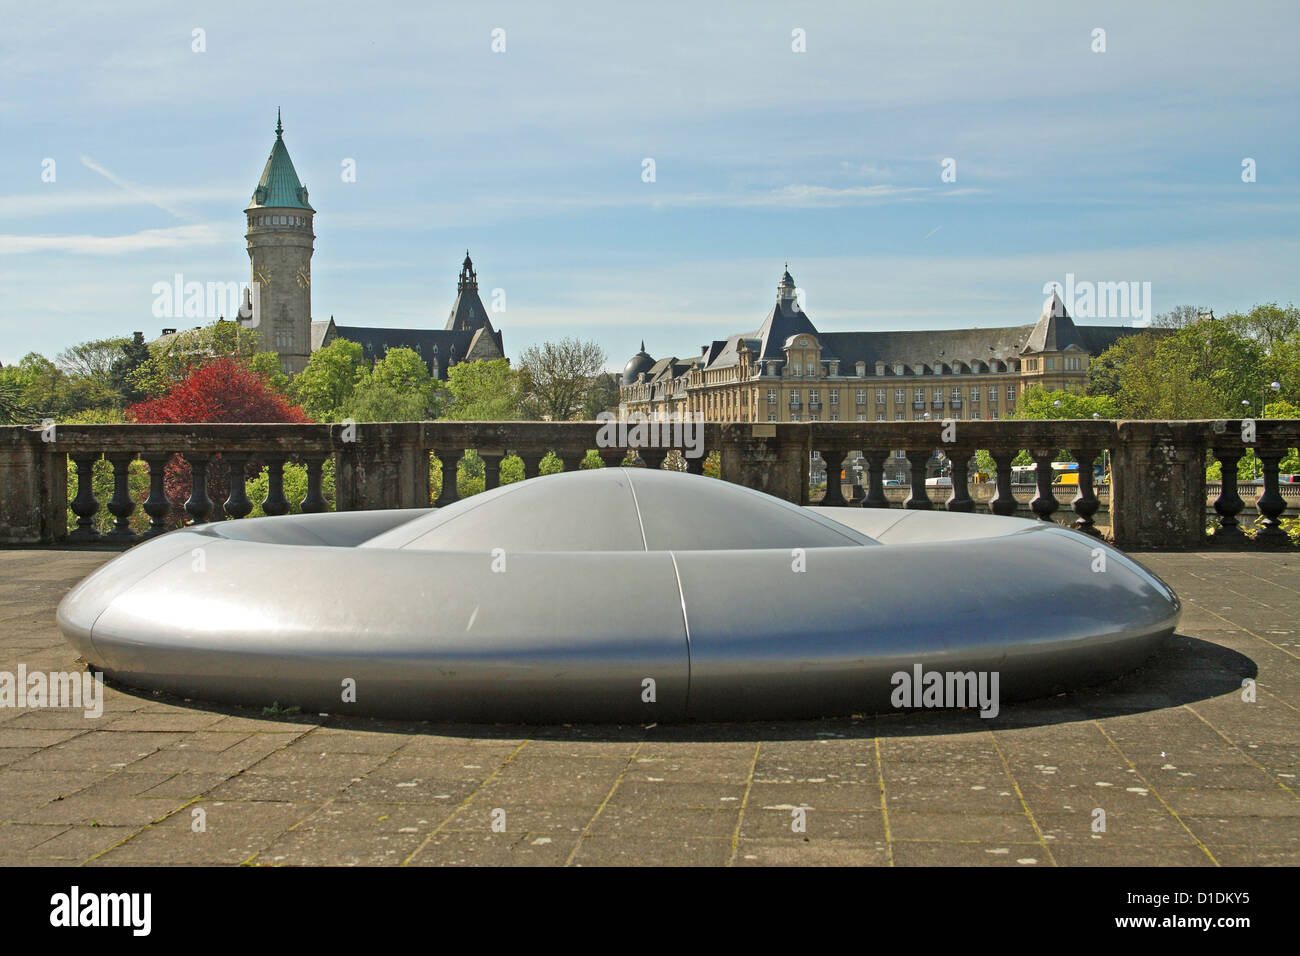 UFO sculpture in Luxembourg City. The tower of the Banque et caisse d'épargne de l'État (BCEE) is in the background. Stock Photo